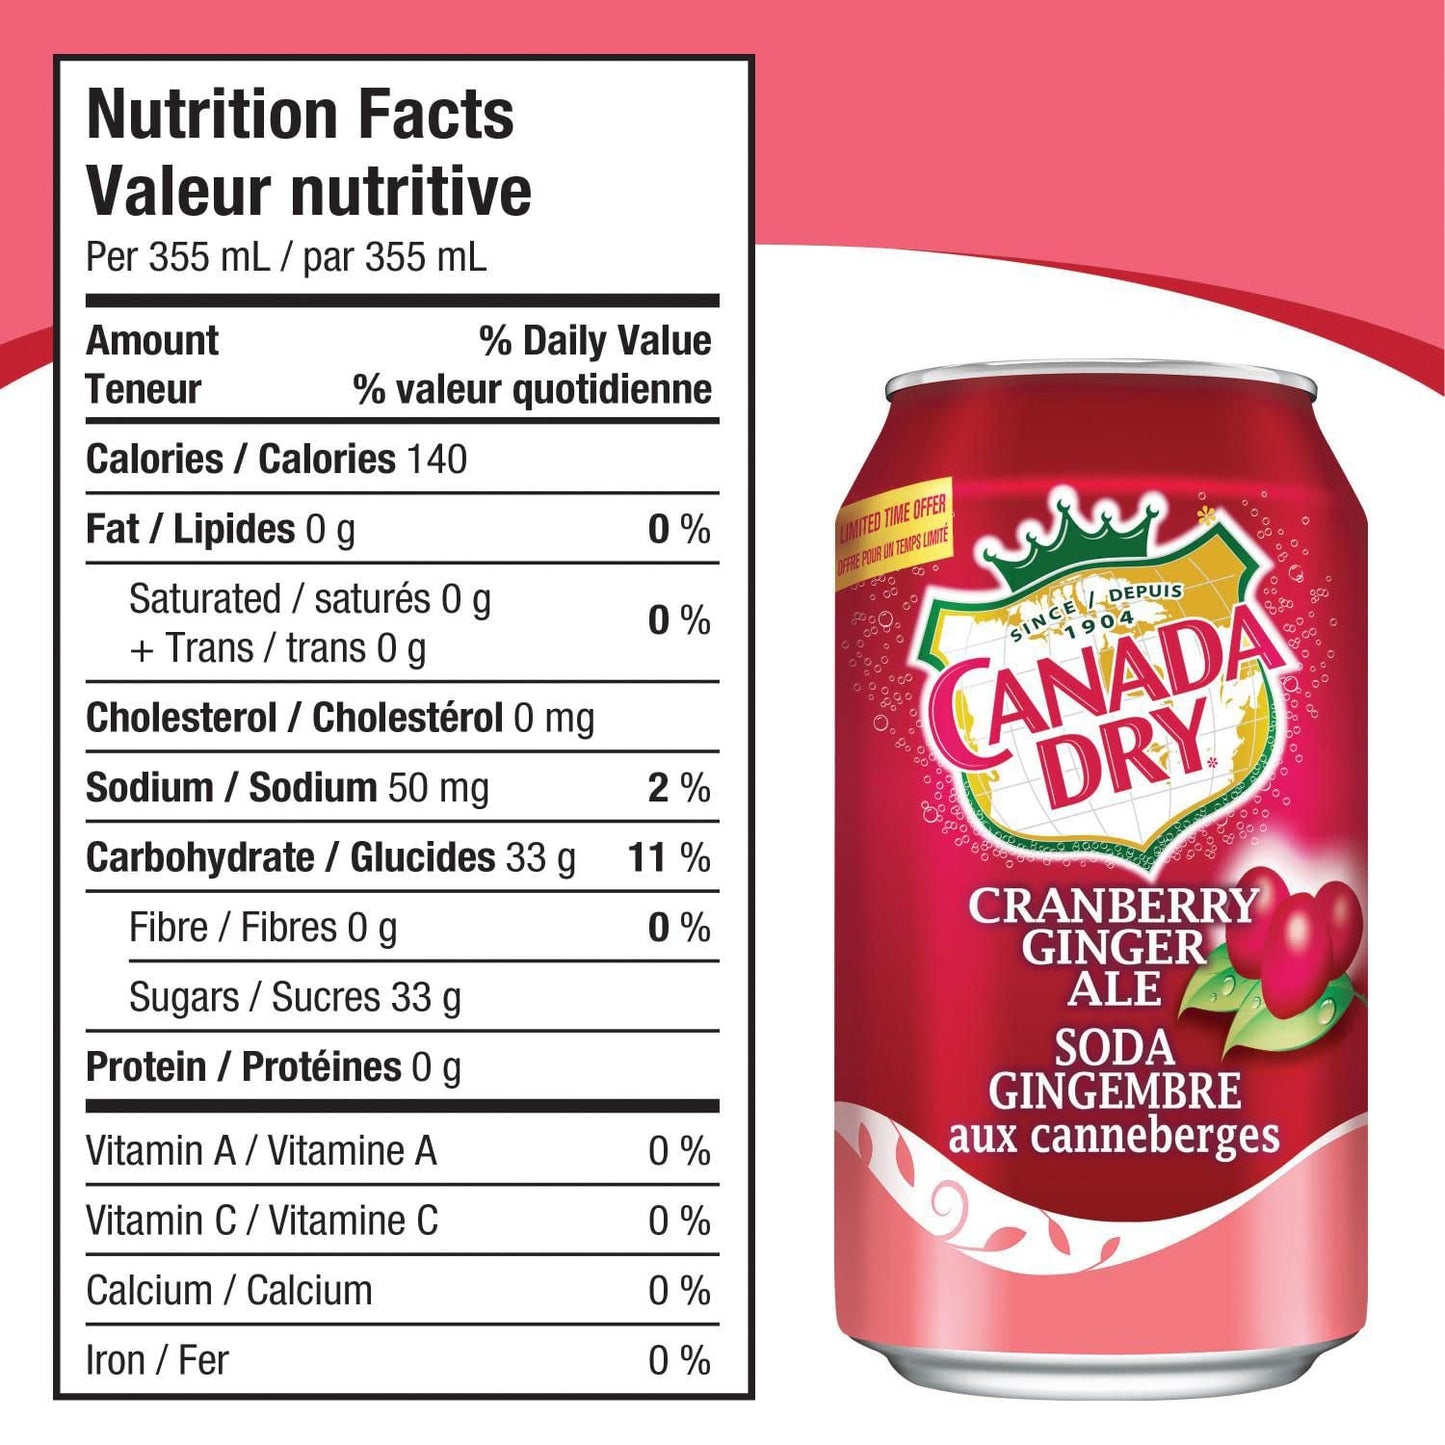 Canada Dry Cranberry Ginger Ale Cans 355ml/12.00oz (Shipped from Canada)